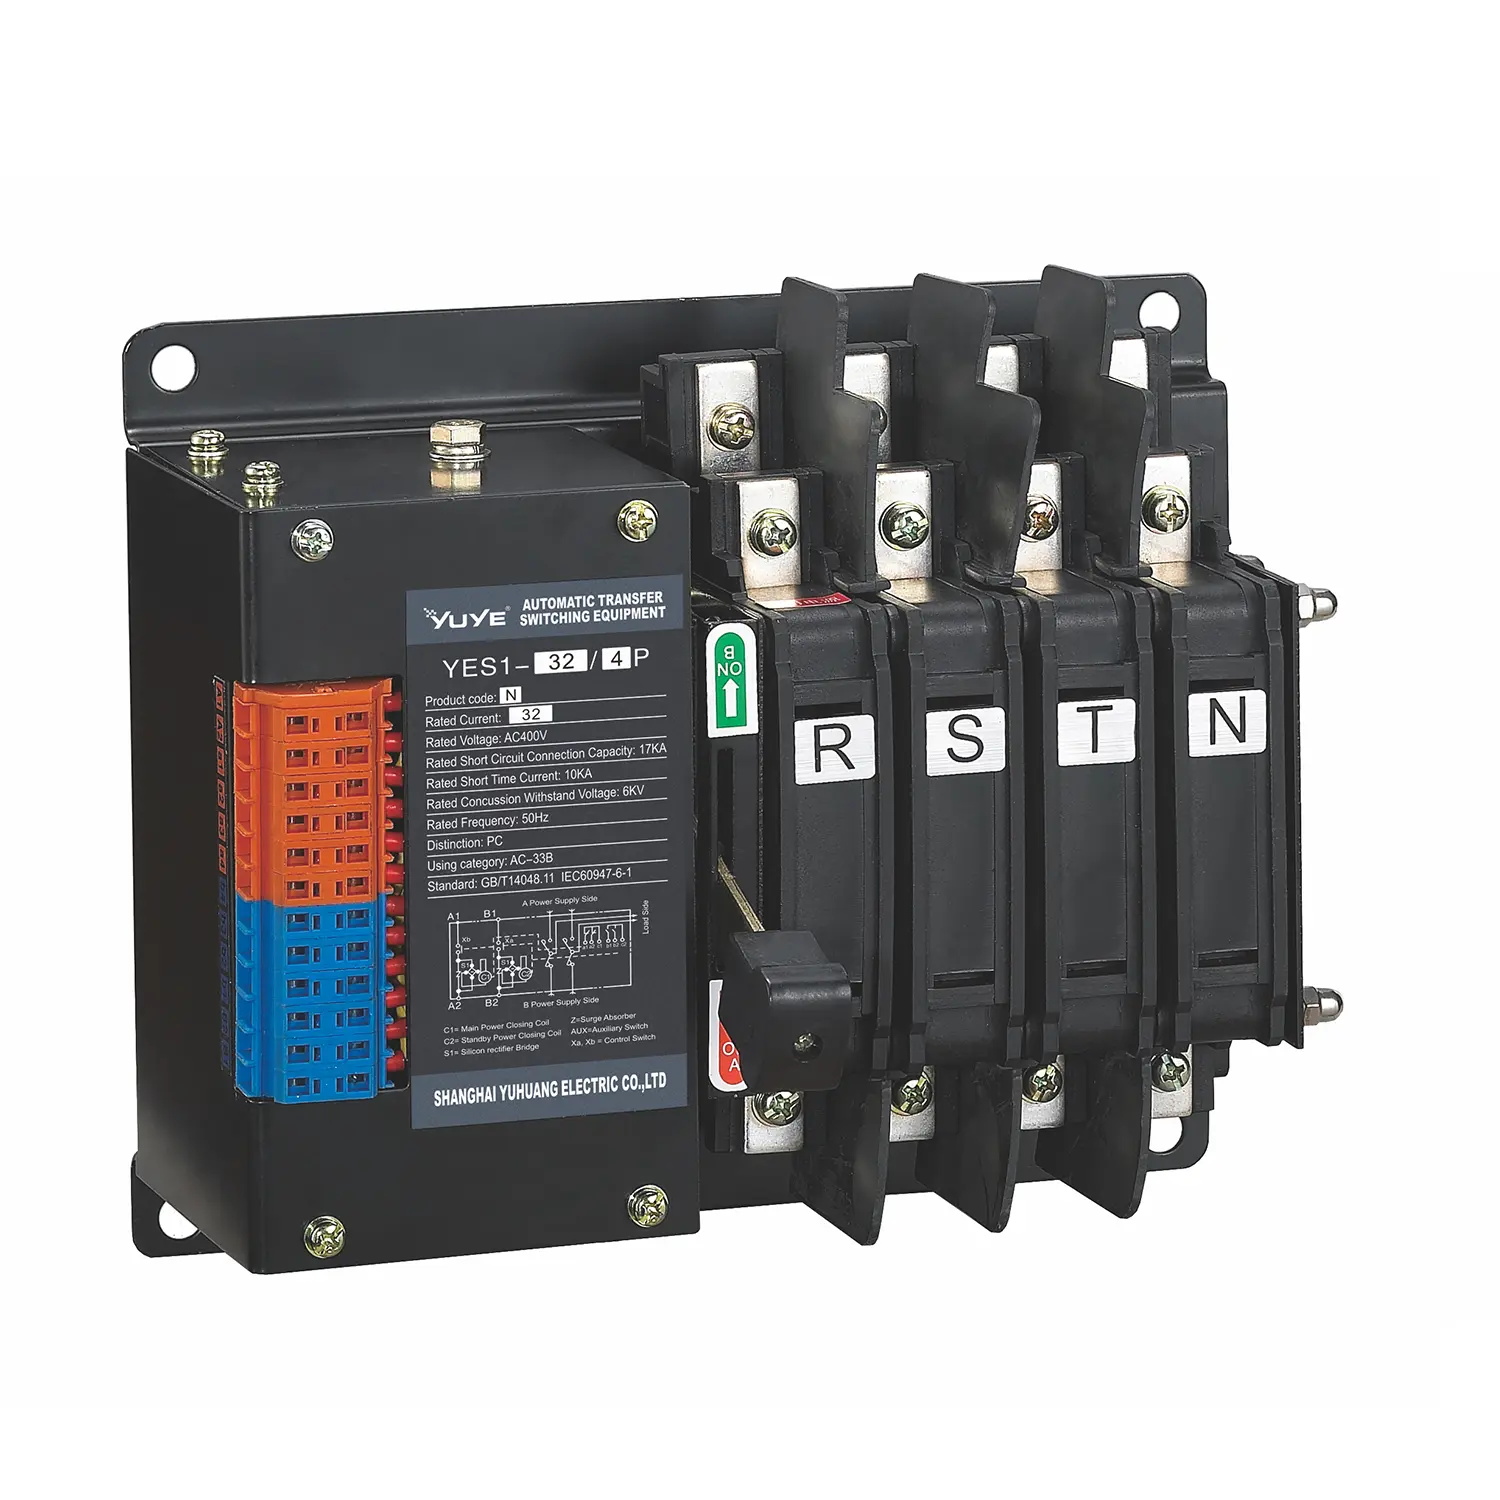 Protection expert for PC-level automatic transfer switch appliances